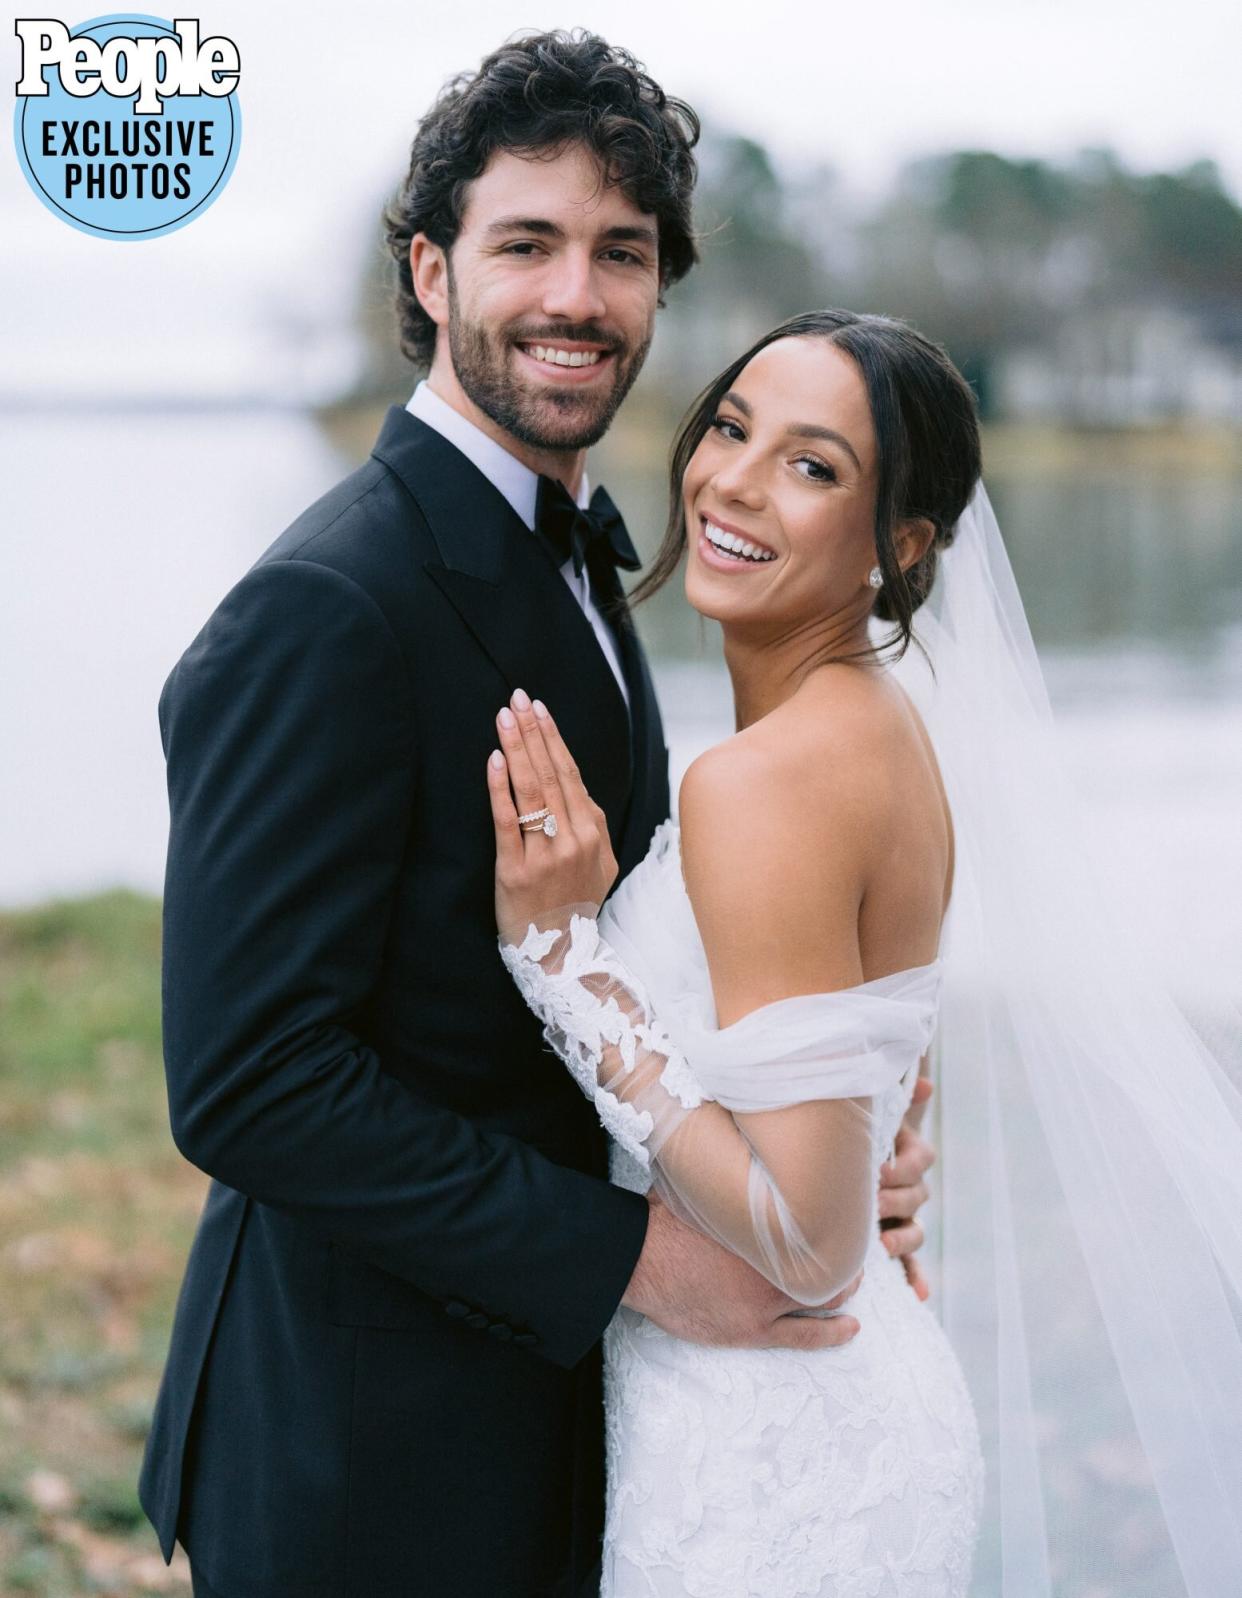 Mallory Pugh and Dansby Swanson wedding EXCLUSIVE photos  at Ritz Carlton Lake Oconee. Credit: Willett Photography